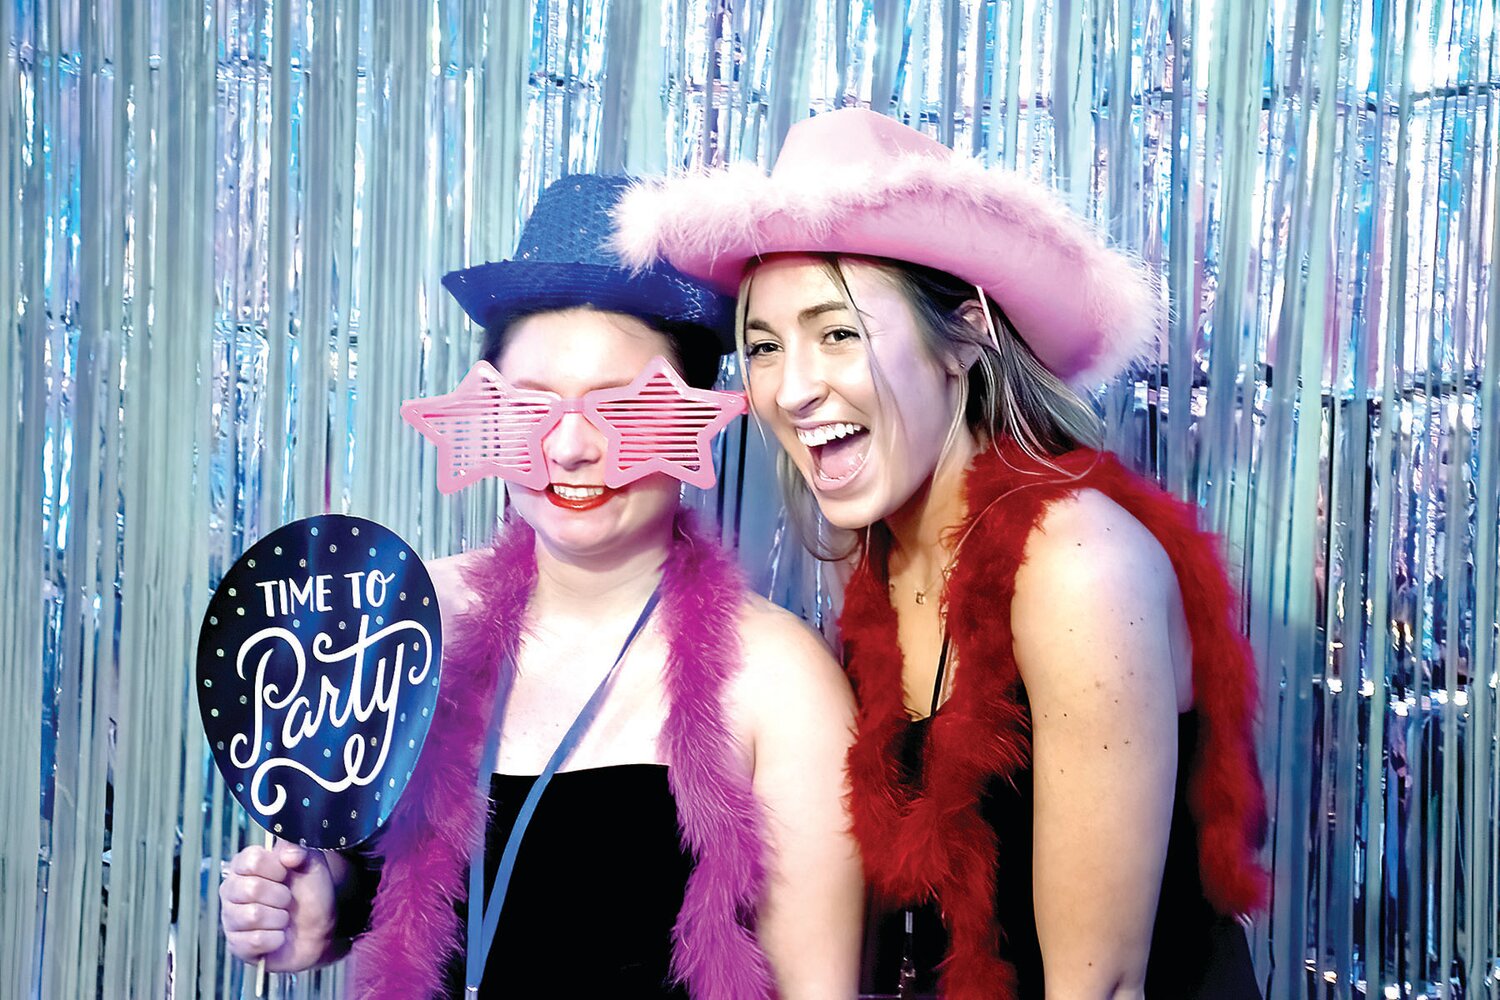 Nikki McCabe with her Night to Shine buddy Elyse Paul at the photo booth.